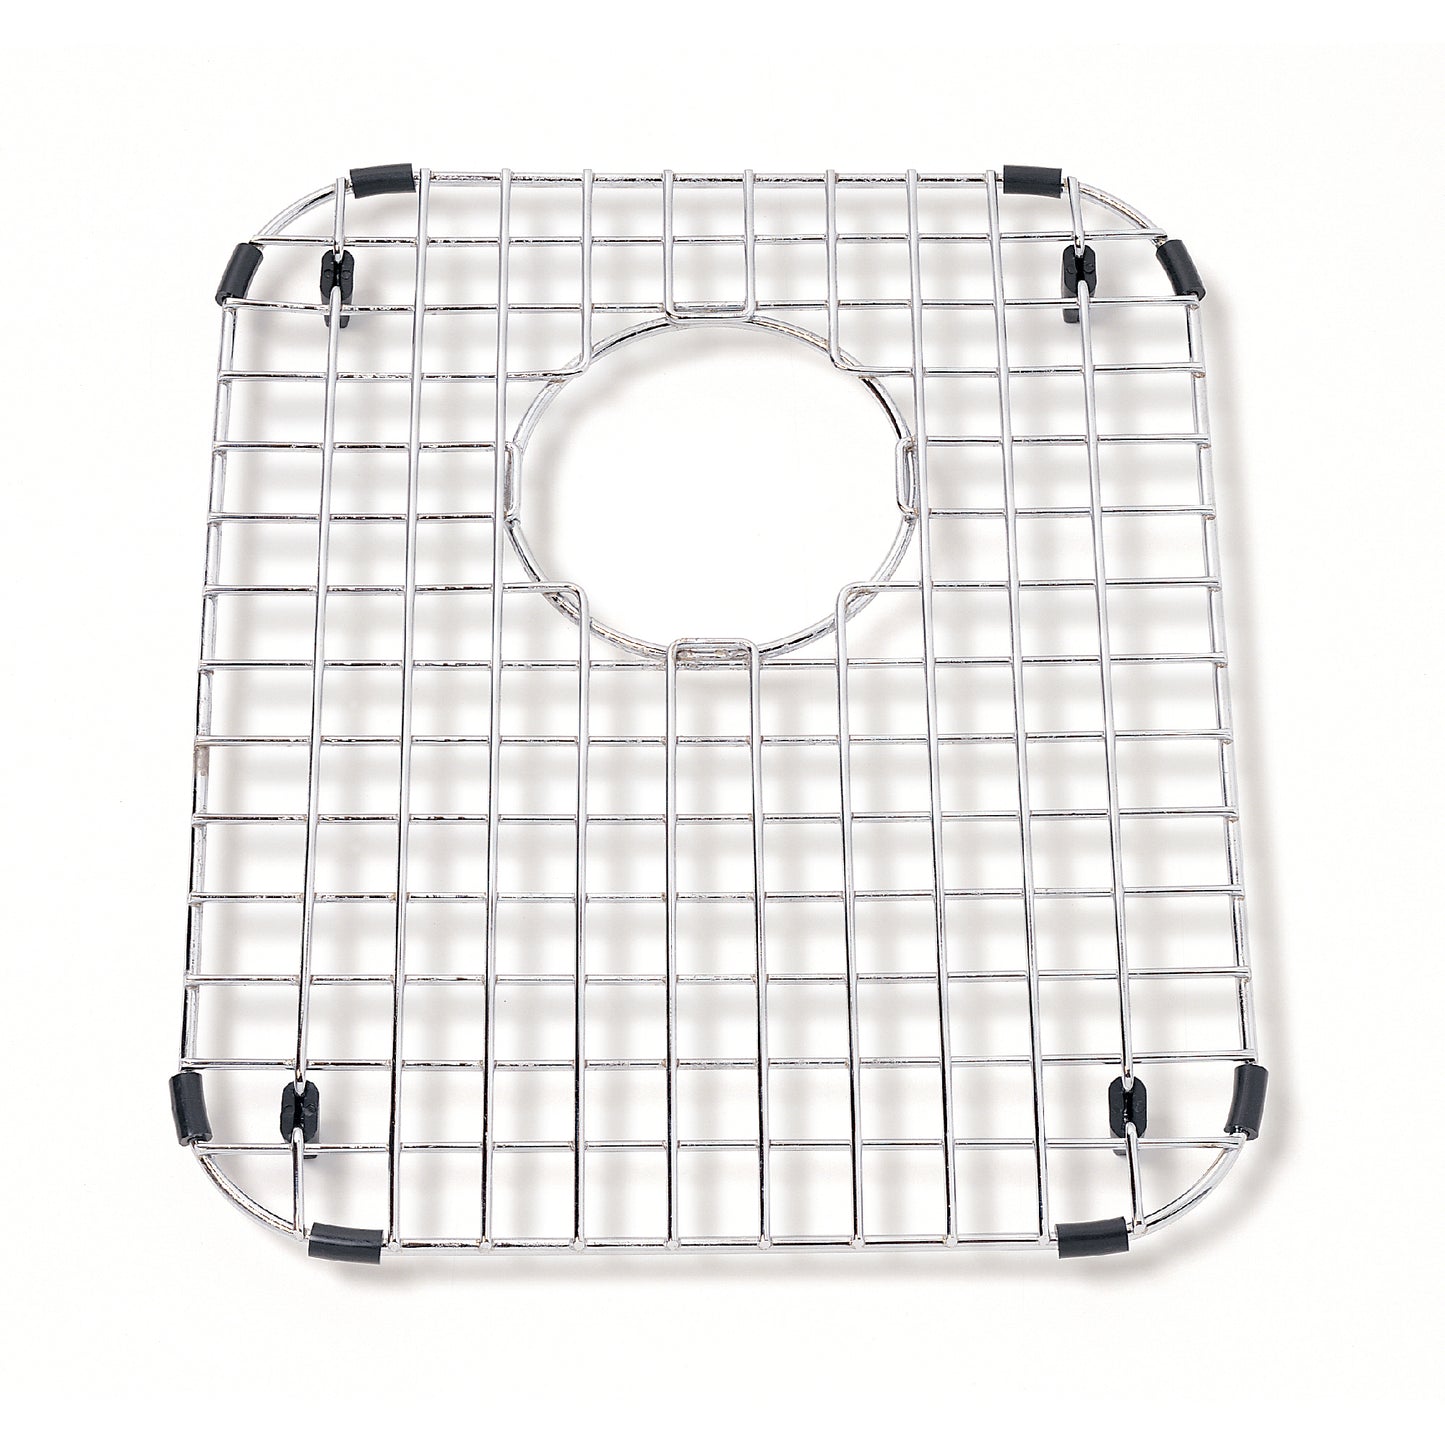 KINDRED BG10S Stainless Steel Bottom Grid for Sink 14.25-in x 11.88-in In Stainless Steel